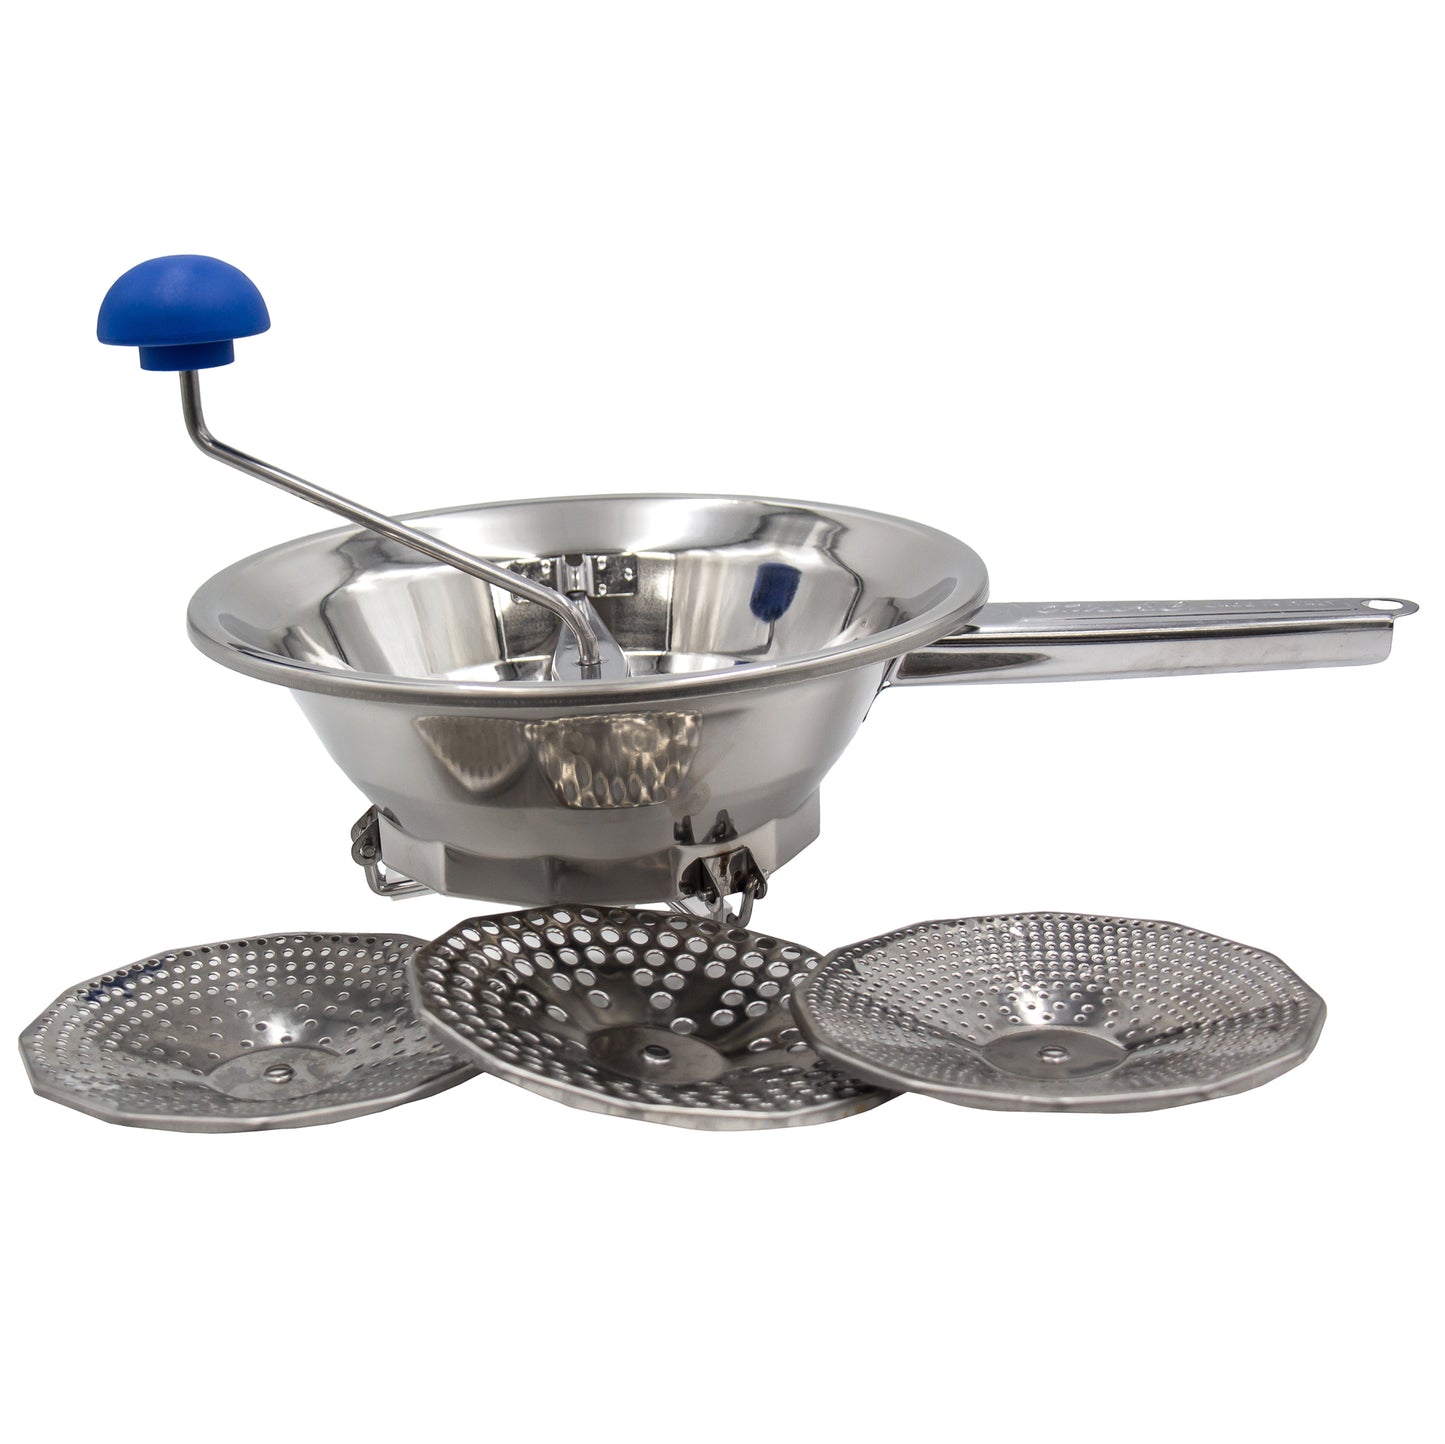 24cm stainless steel vegetable mill or mouli with three grate sizes